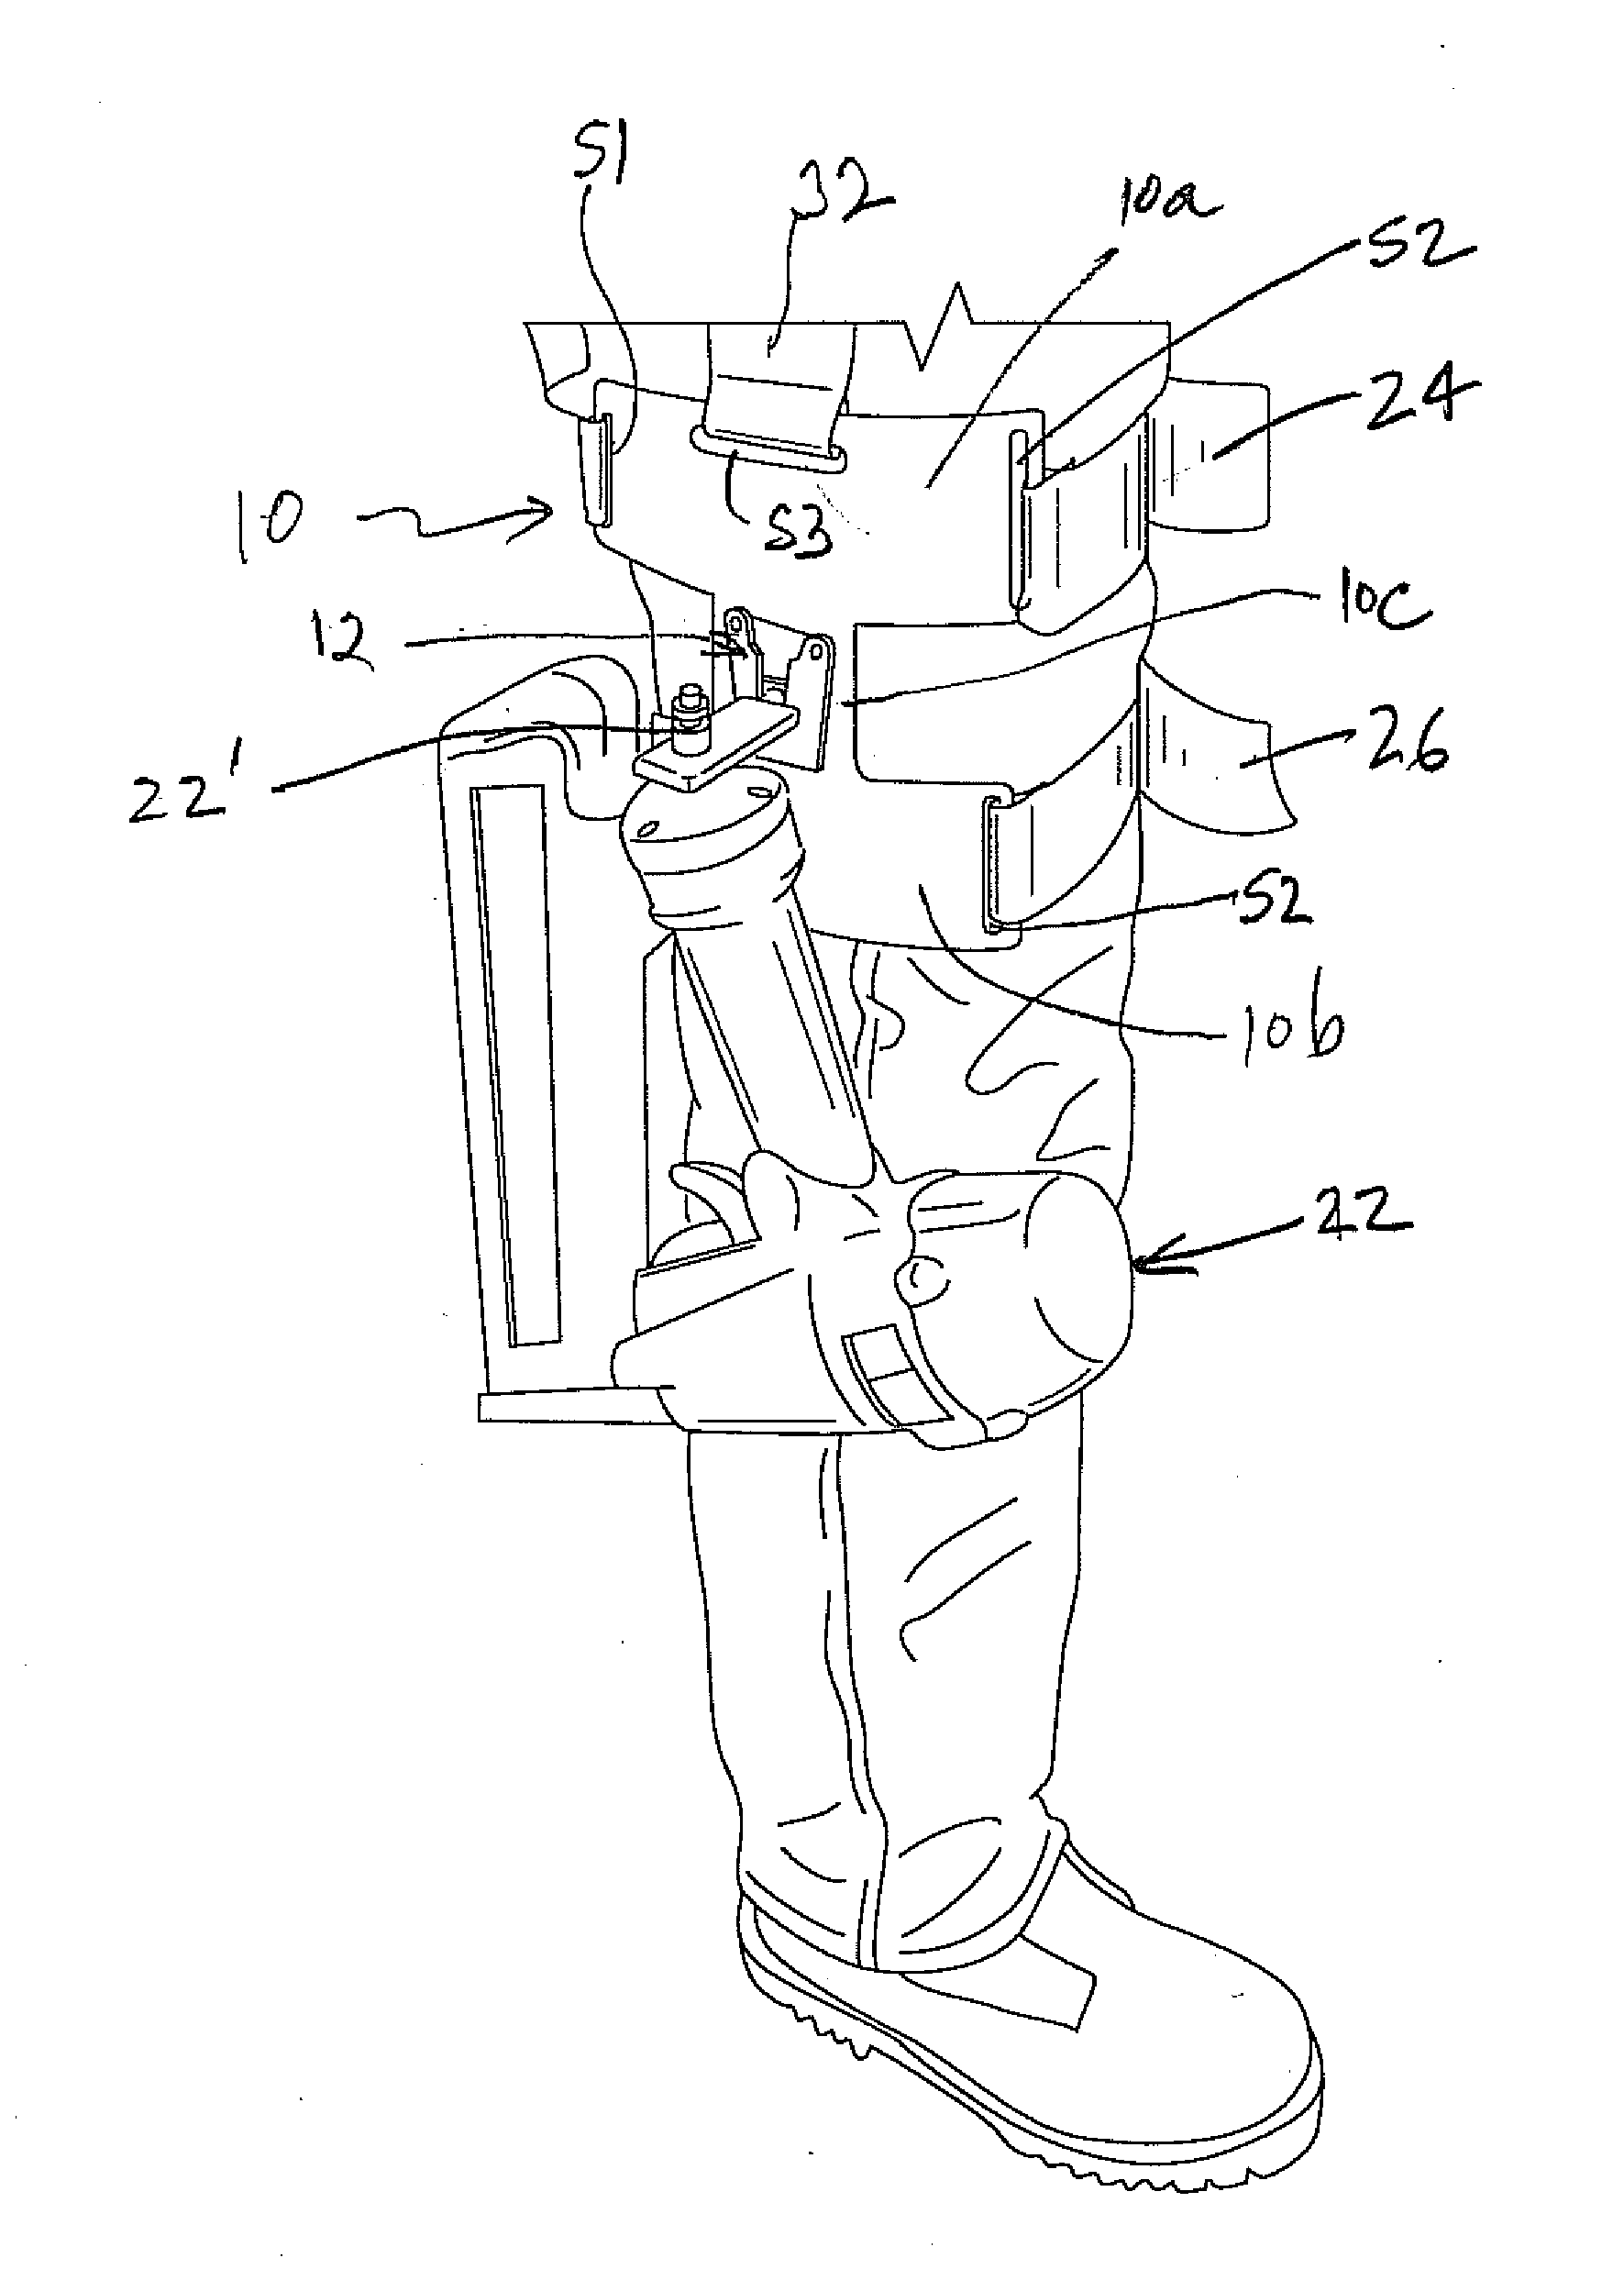 Tool holster for attachment to leg